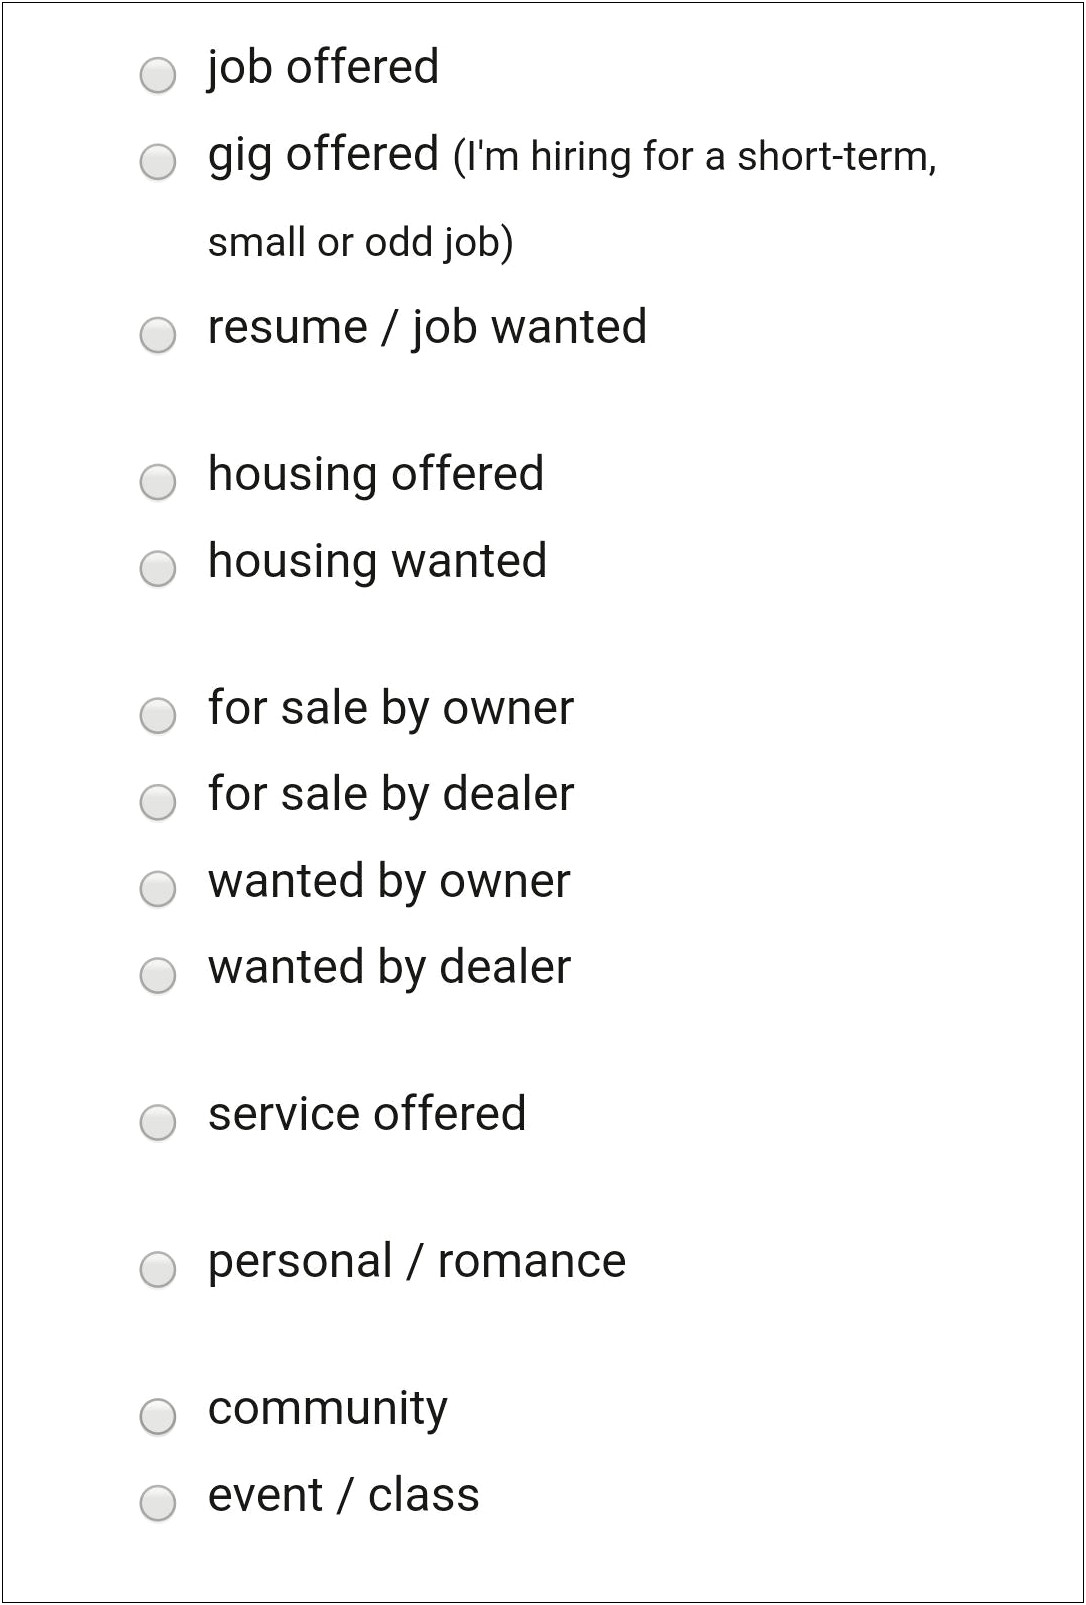 Job Offered Vs Resume Job Wanted